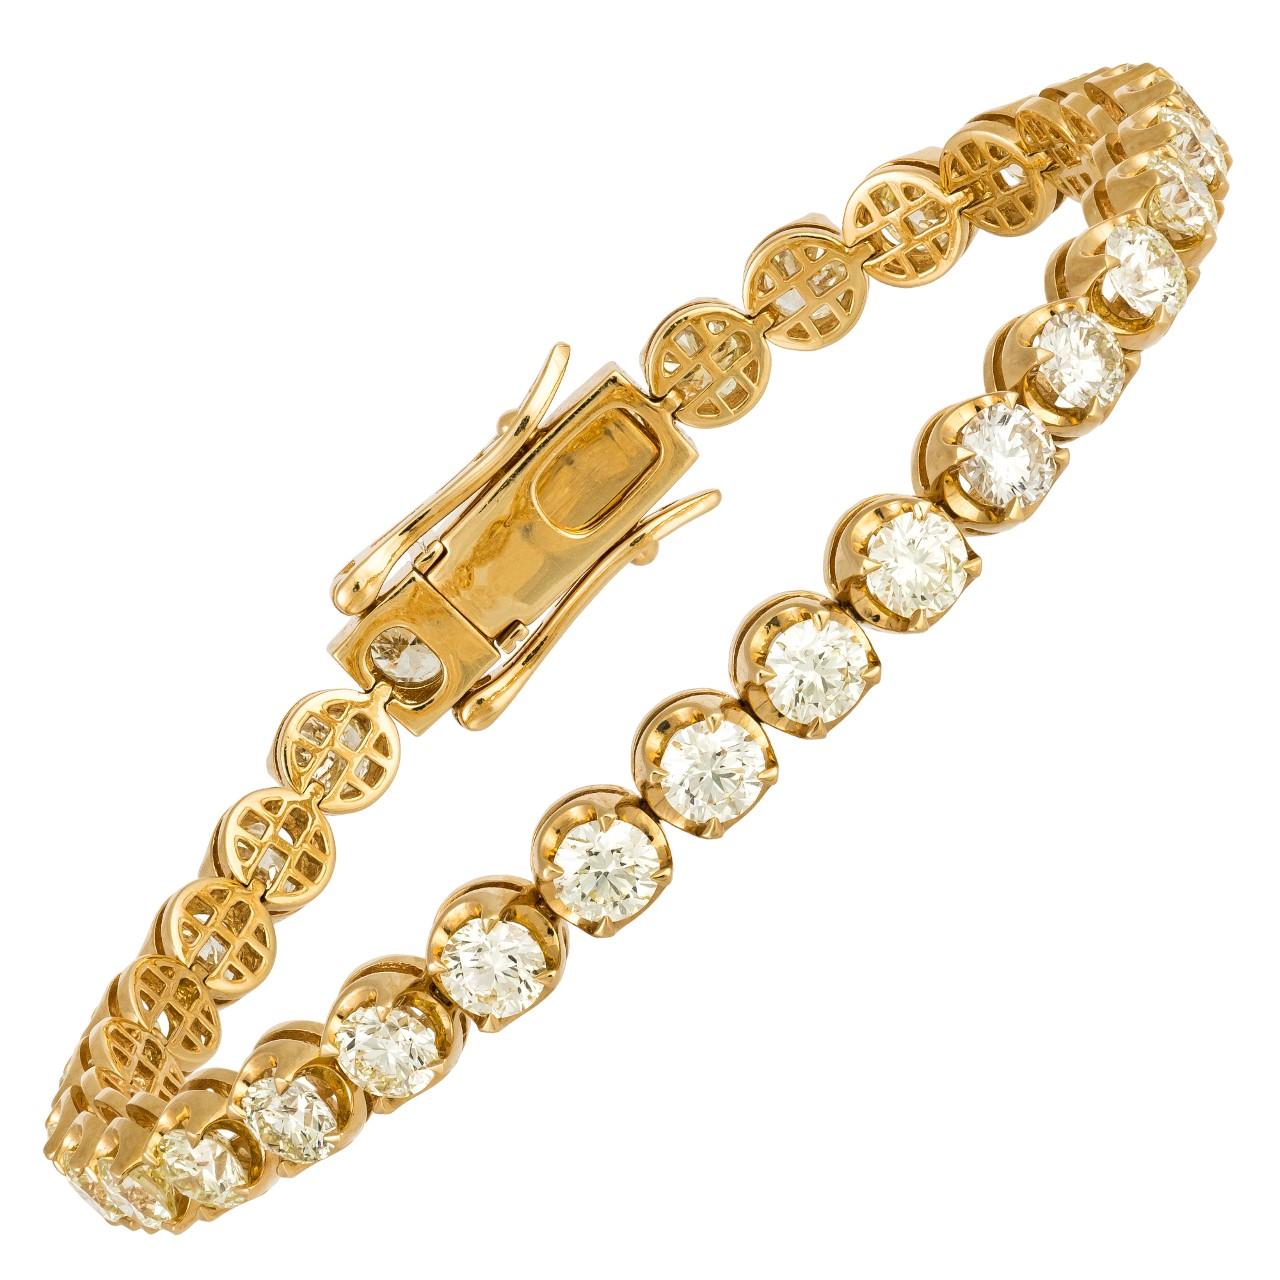 Bracelet Yellow Gold 18 K
Diamond 11.06 Cts/31 Pcs

Weight 20,78 grams

With a heritage of ancient fine Swiss jewelry traditions, NATKINA is a Geneva based jewellery brand, which creates modern jewellery masterpieces suitable for every day life.
It